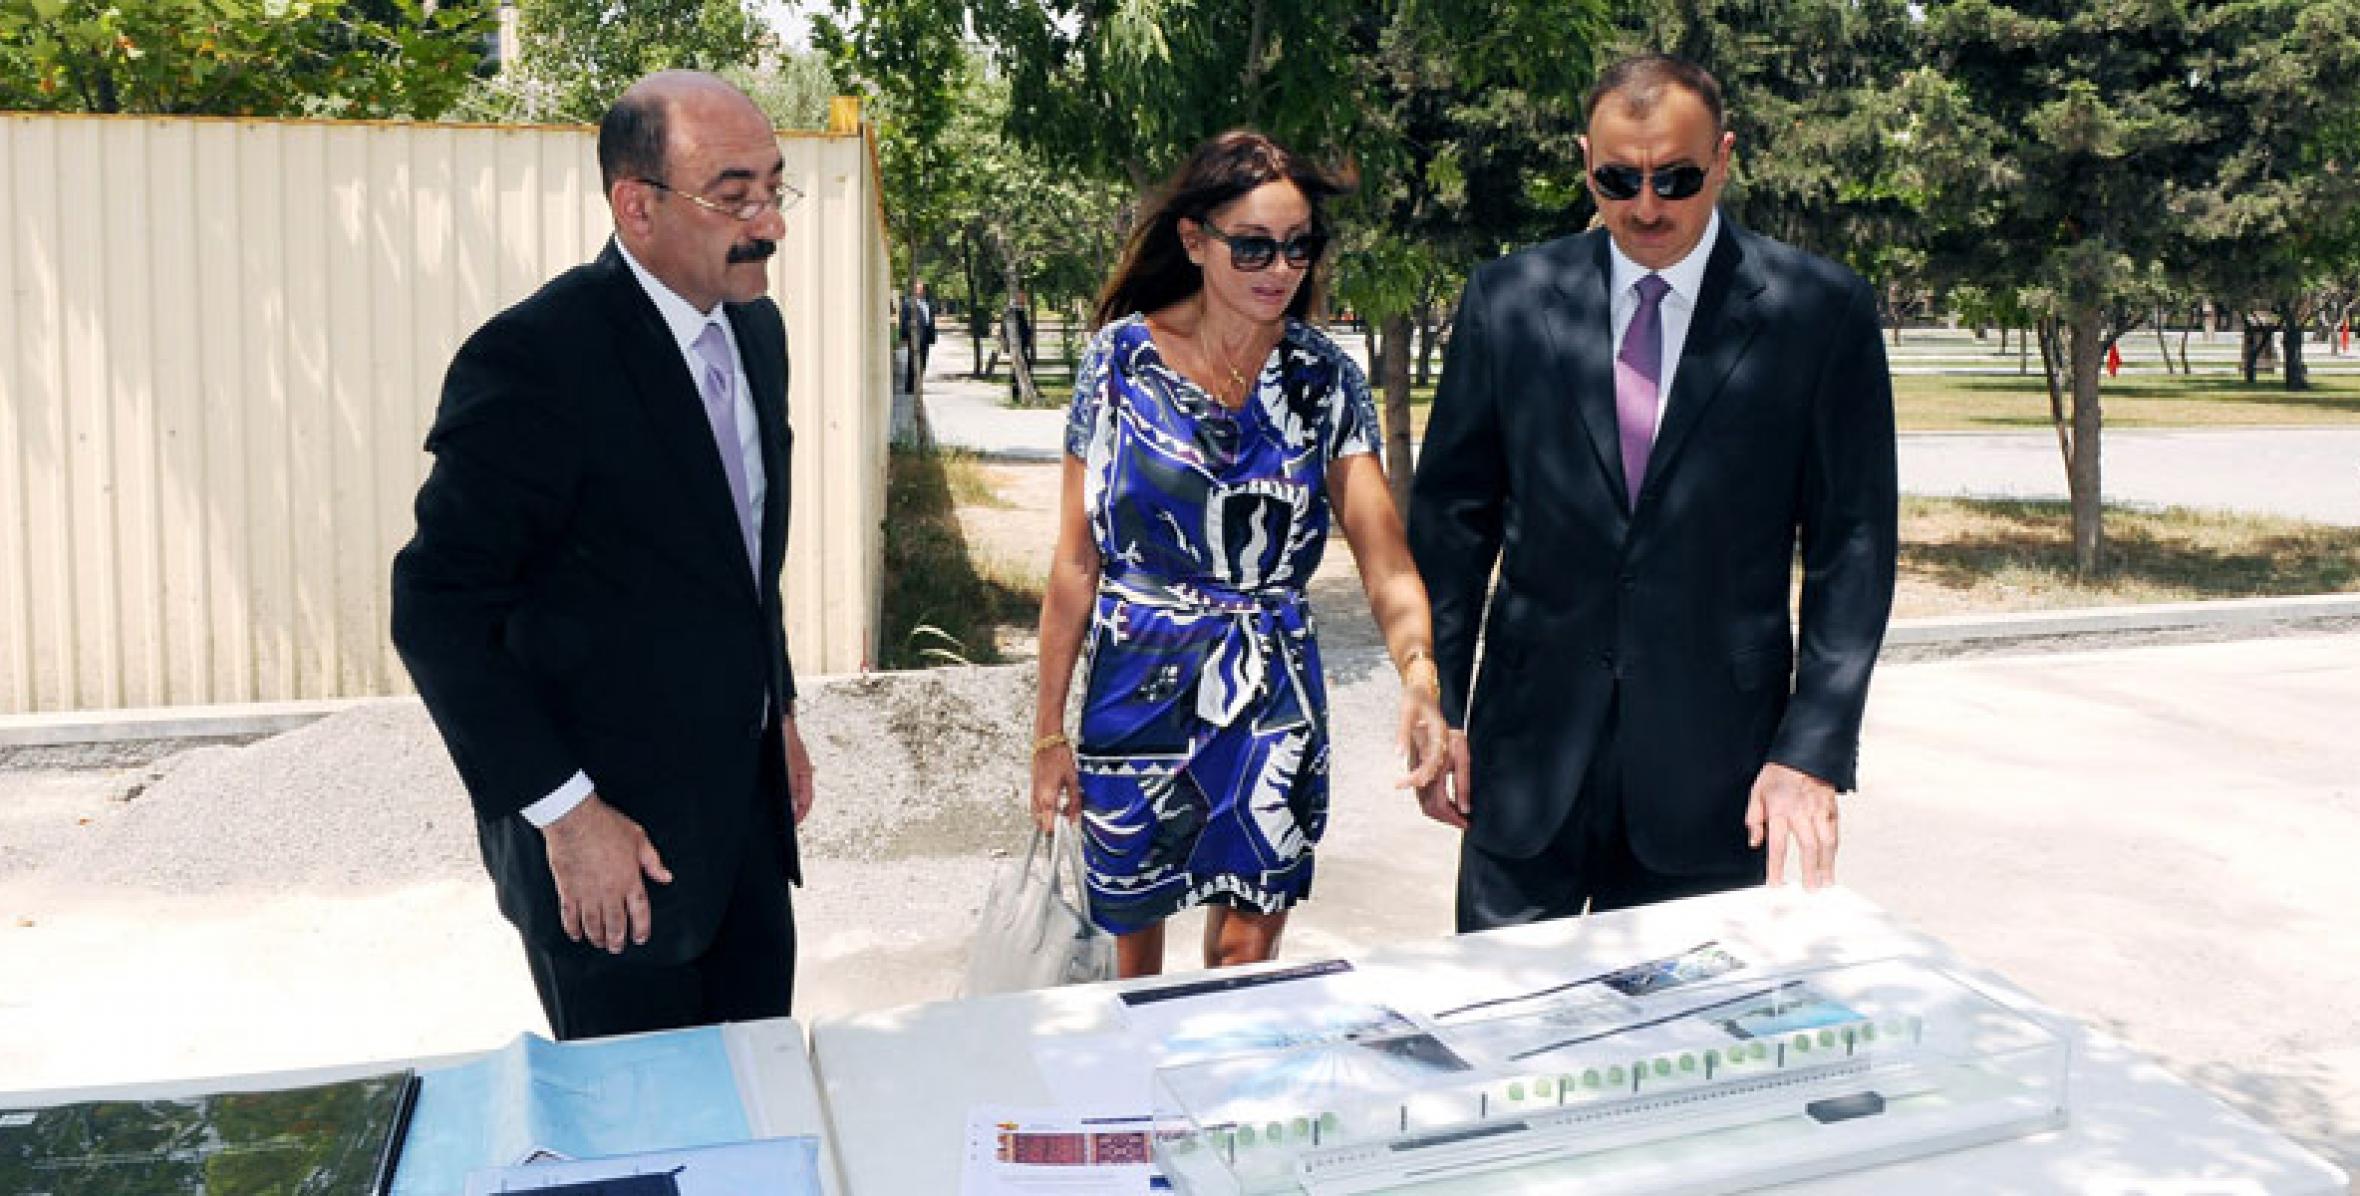 Ilham Aliyev inspected the reconstruction works at Azerbaijan State Museum of Carpet and Applied Arts